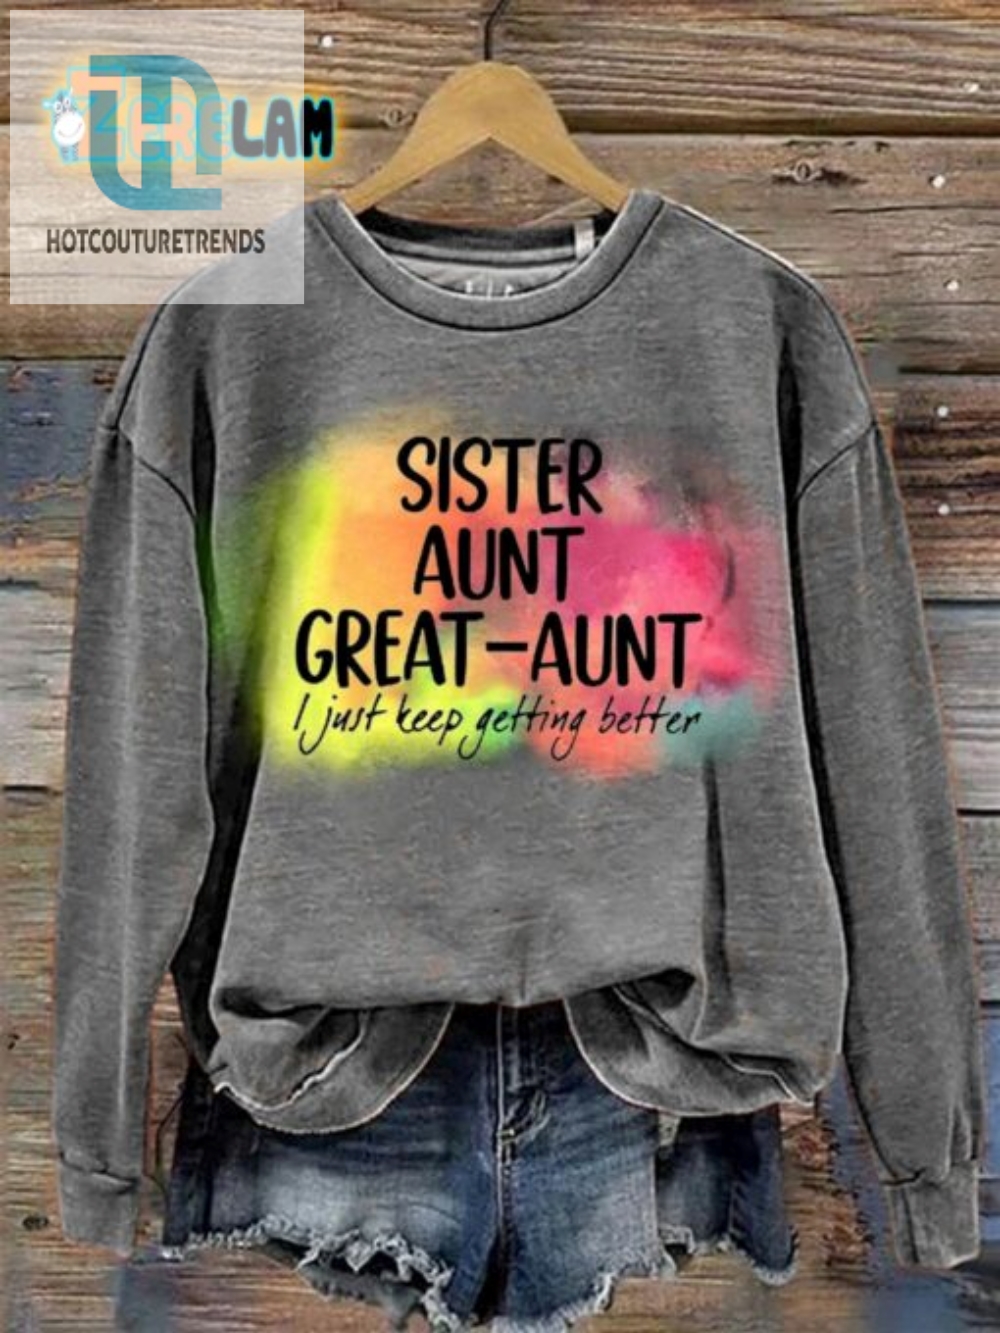 Stay Cozy And Fabulous With This Colorful Sisterauntgreataunt Sweatshirt